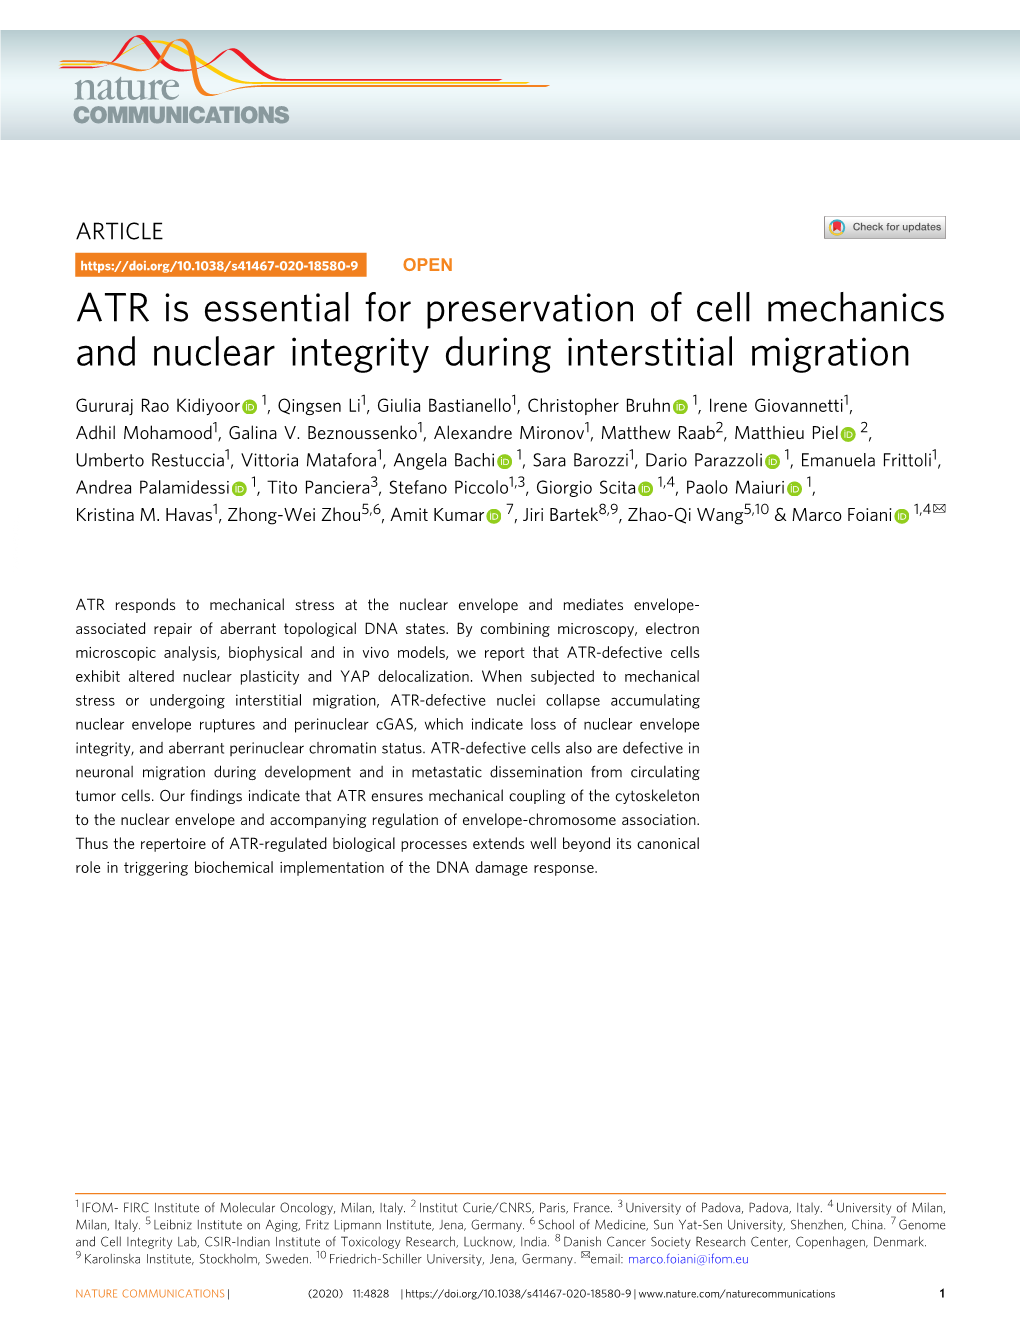 ATR Is Essential for Preservation of Cell Mechanics and Nuclear Integrity During Interstitial Migration